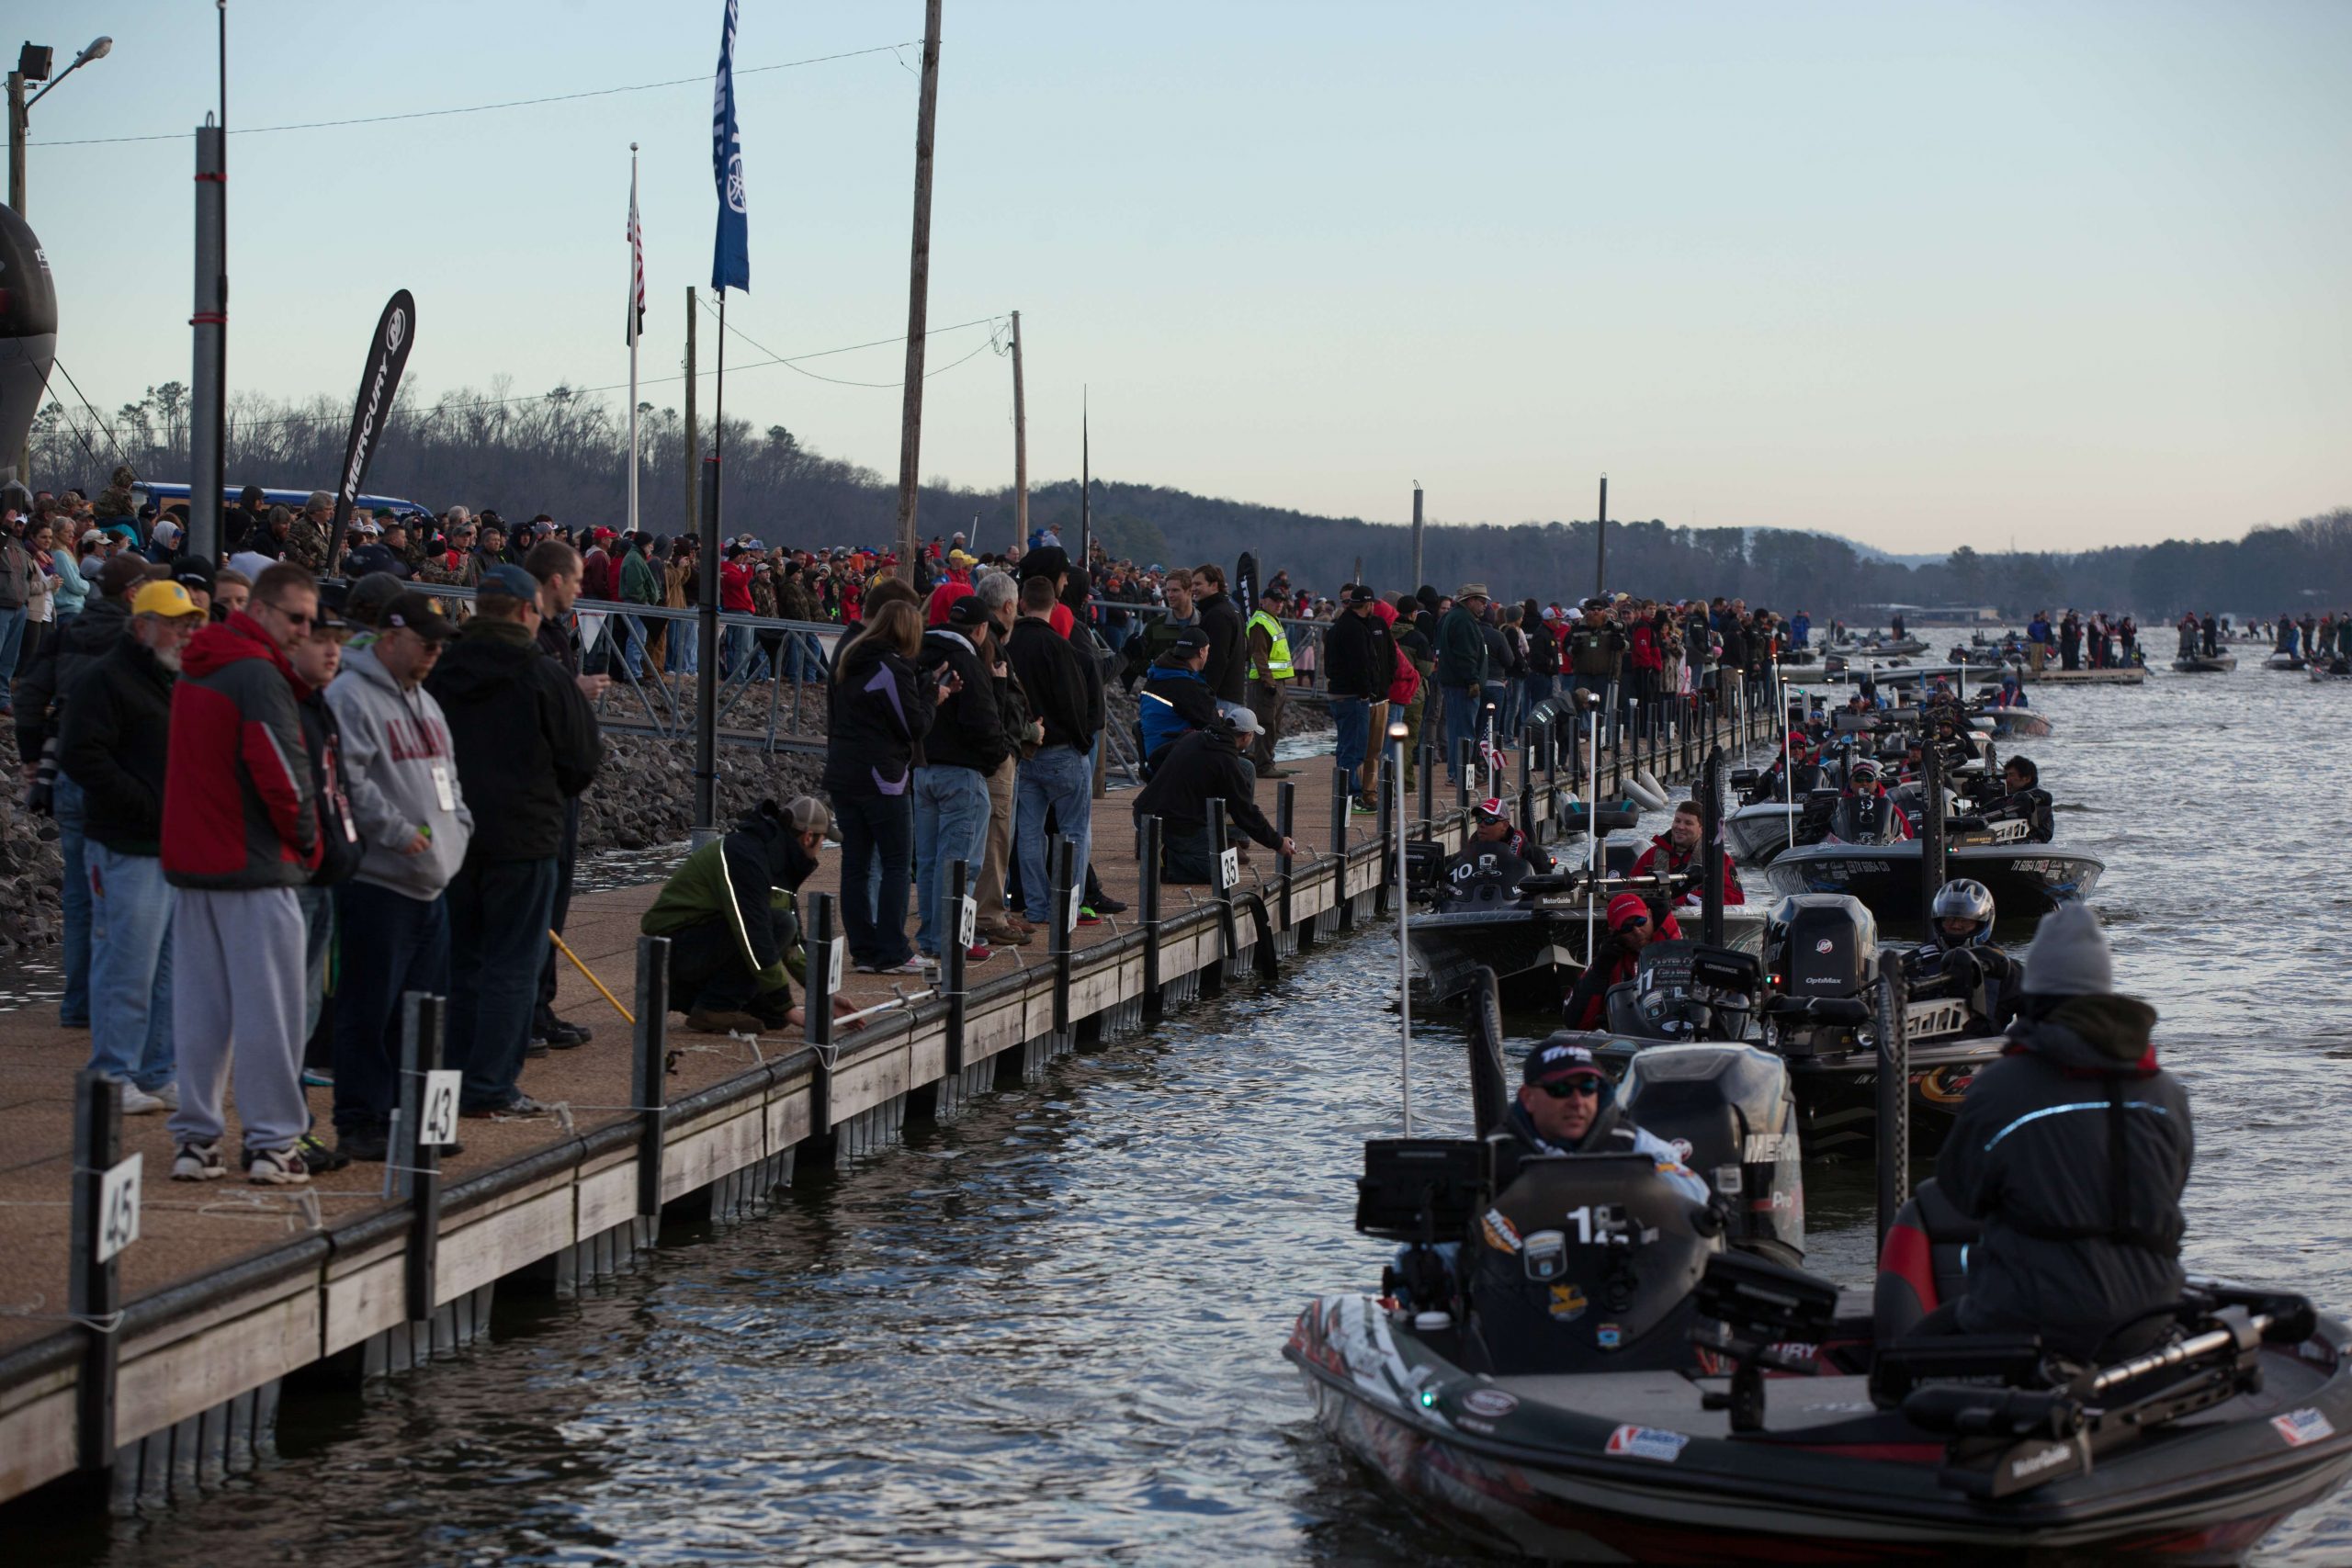 <p>Fifty-six anglers are competing in the Classic this year on Lake Hartwell. That means that if all things were equal, the odds of any one of them winning would be 56:1. But that's only if you put their names on ping pong balls and stirred them up in a barrel before picking one. Fortunately, life is not a random draw, and there's about as much difference between the competitors as you could imagine. They range in age from 24 (Jacob Wheeler) to 63 (Paul Elias) and in experience from first-time qualifiers (13 of them) to a man fishing his 18th championship (Mark Davis). They've had success on Hartwell (Casey Ashley won an FLW event at about the same time of year in 2014) and they've bombed (Chris Lane was 49th out of 50 there in the 2008 Classic). So 56:1 is just the starting point. Once you look closer, those numbers change significantly for most of the field.</p>
